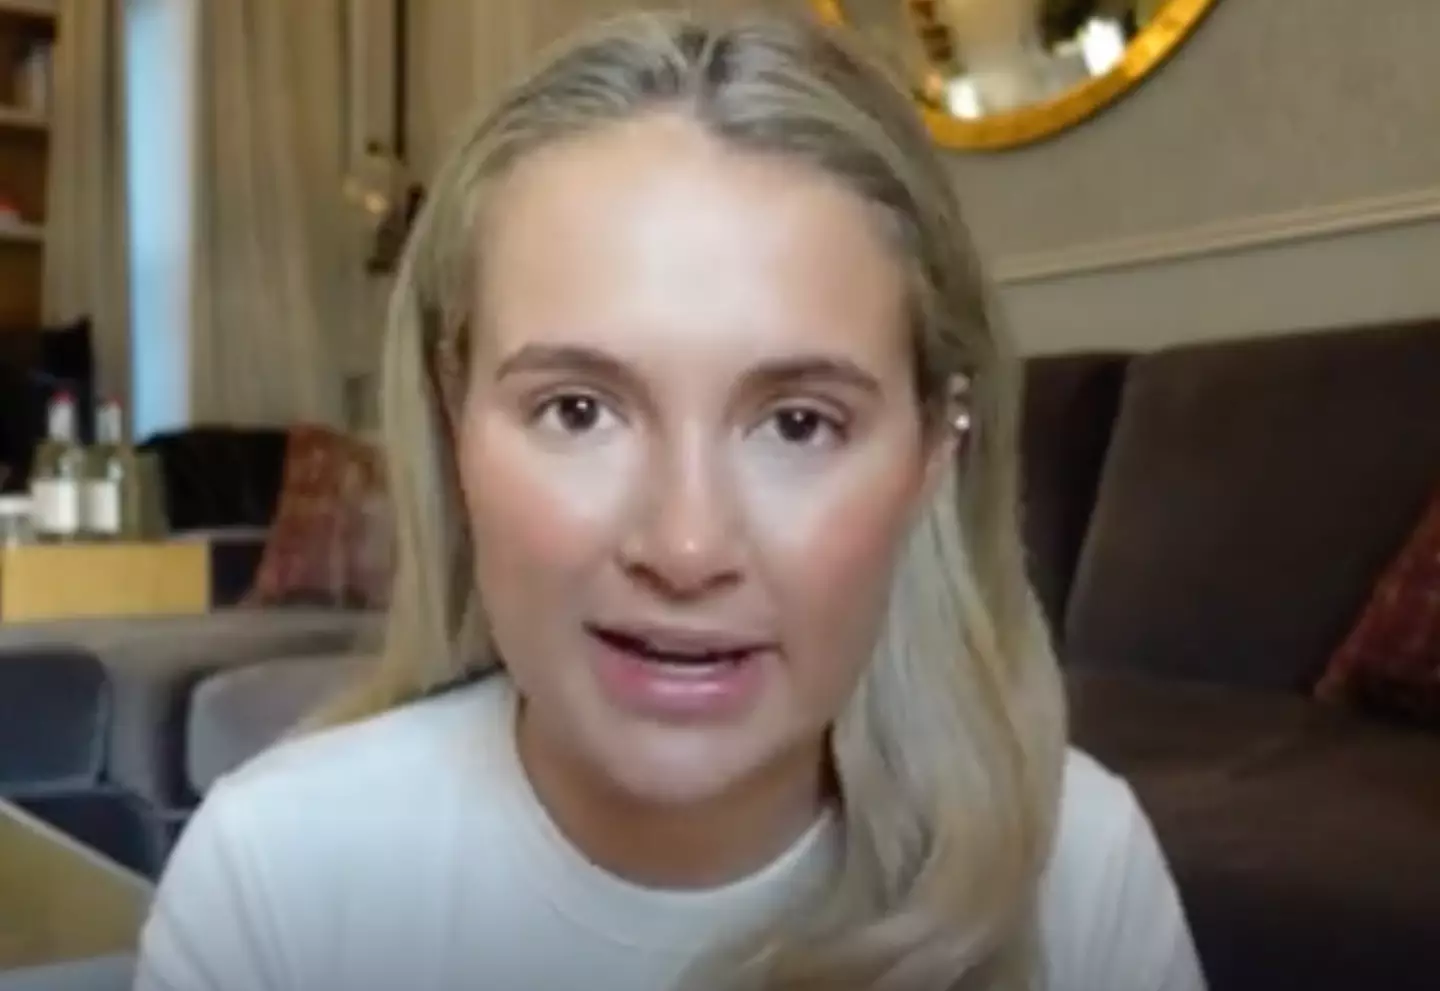 Molly-Mae addressed the rumours of her split from Tommy Fury on a YouTube video.